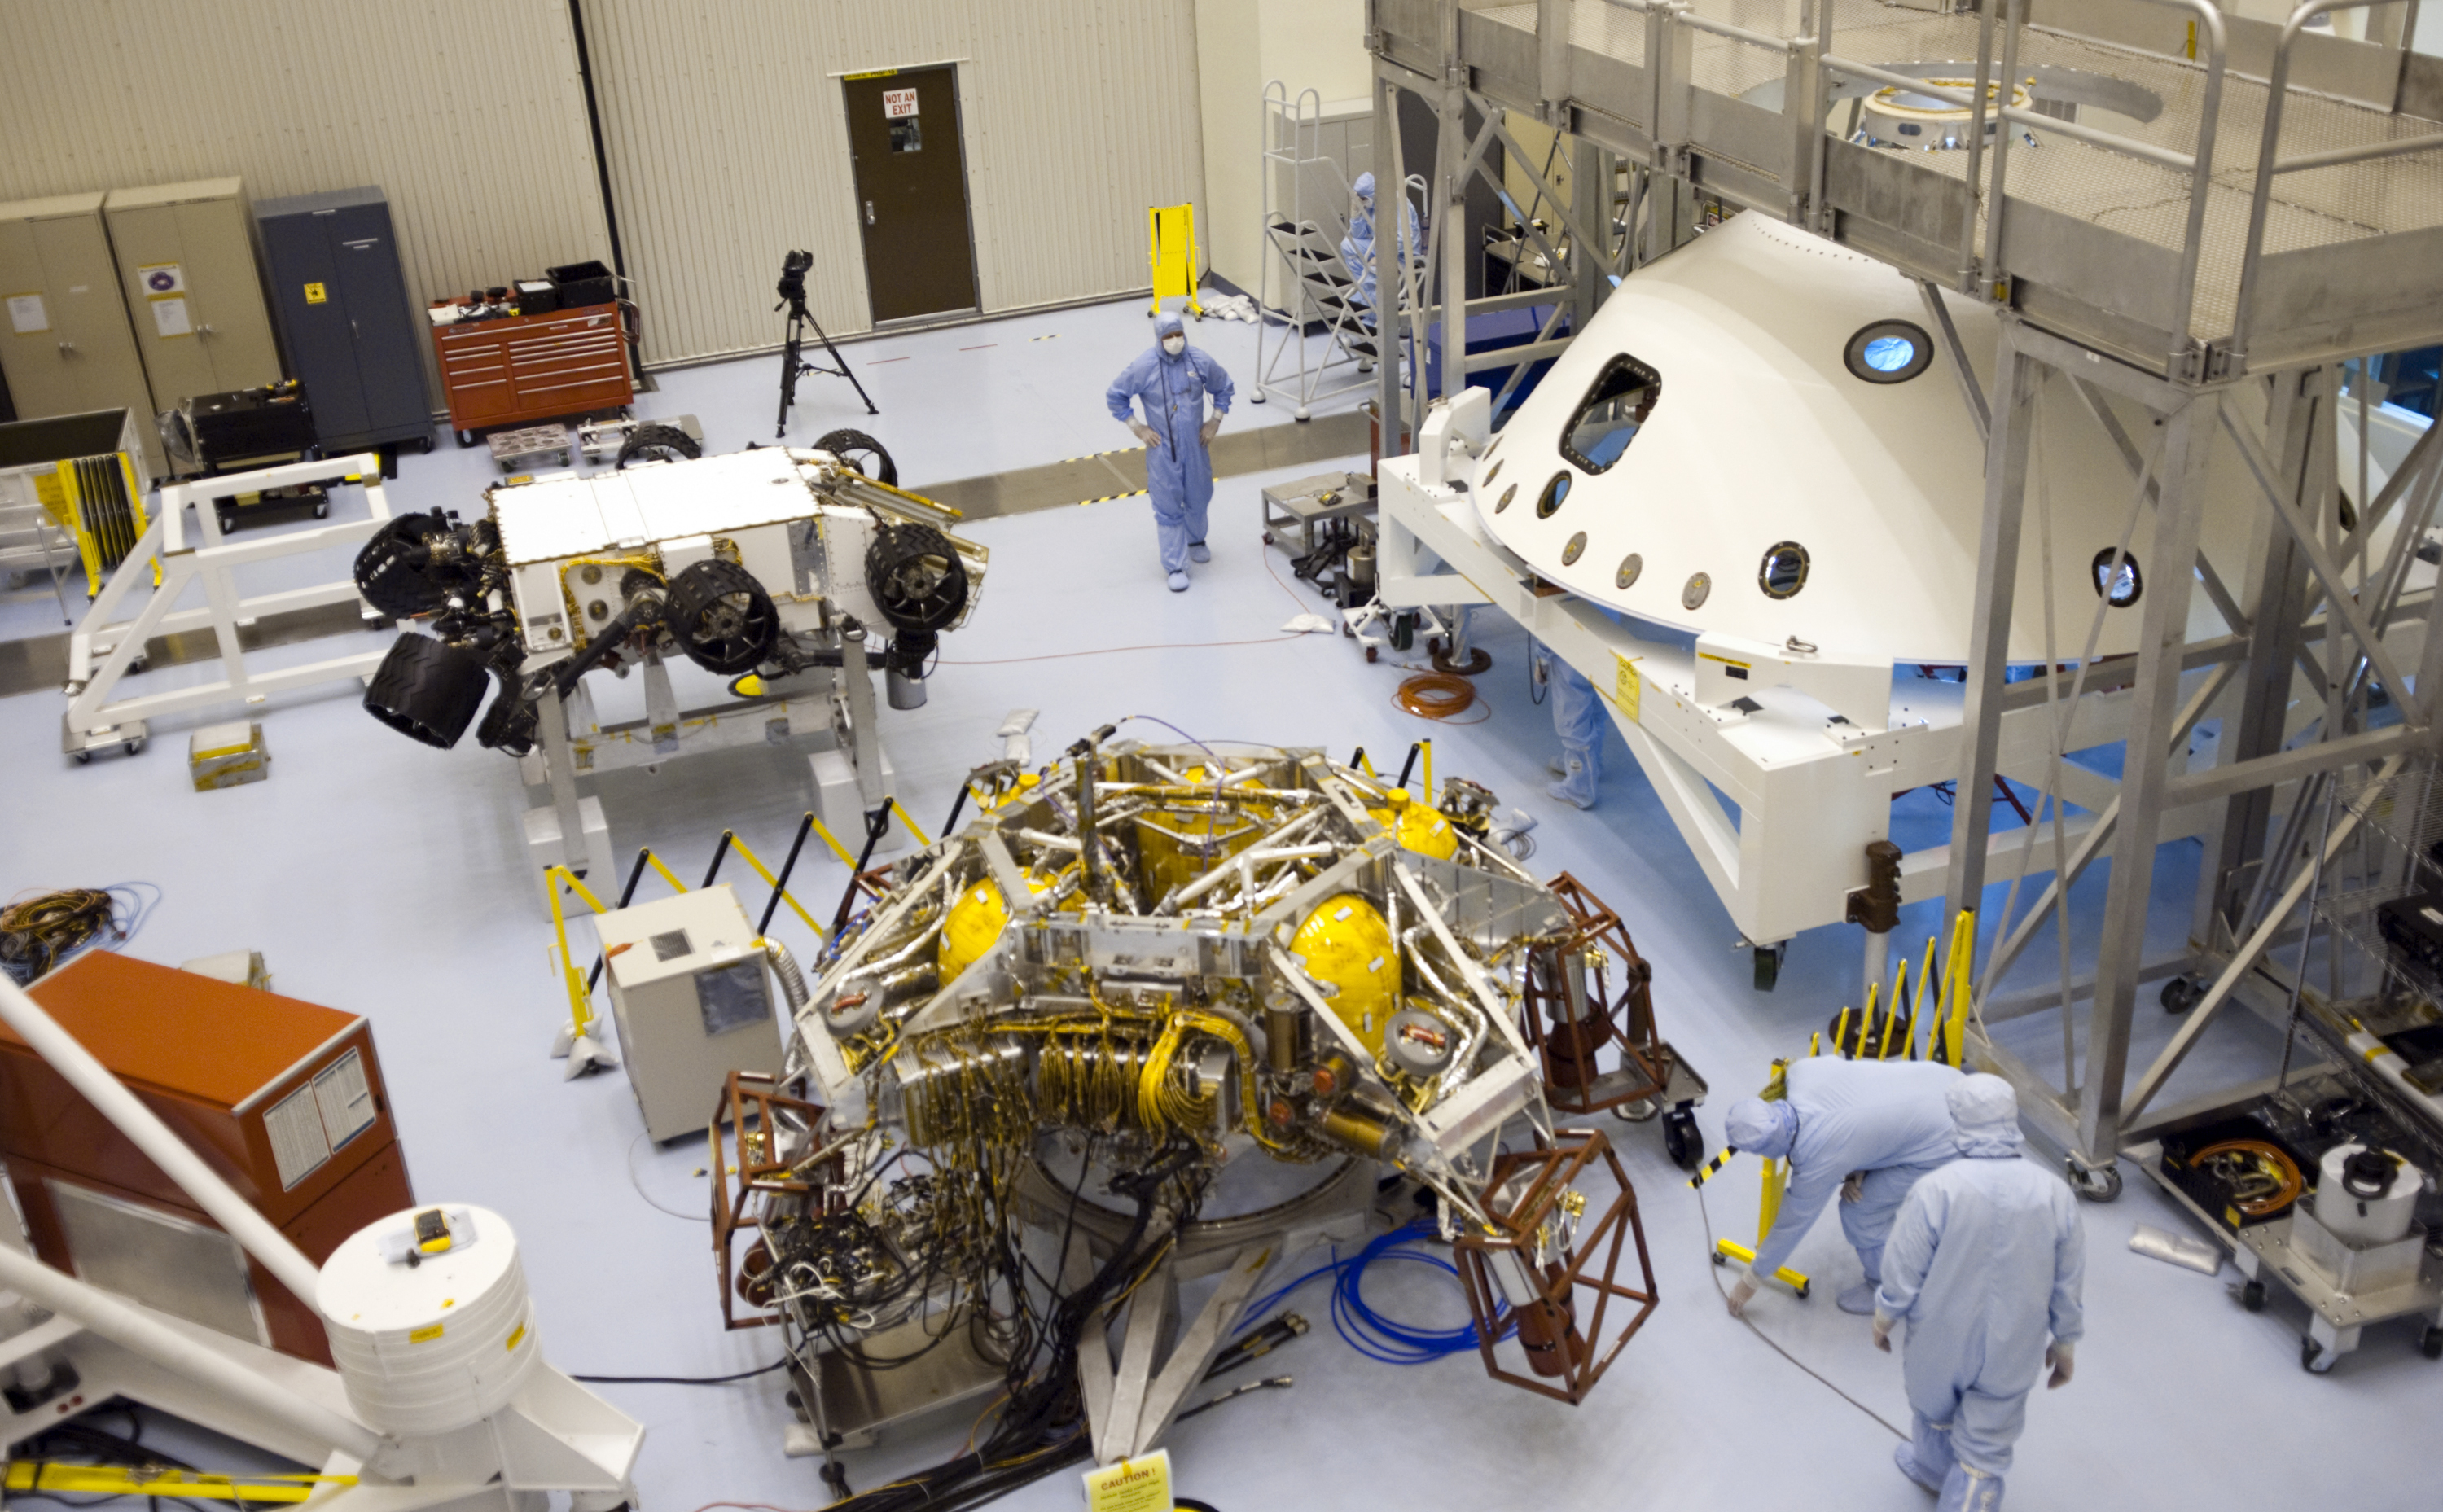 In the Payload Hazardous Servicing Facility at NASA's Kennedy Space Center in Florida, NASA's Mars Science Laboratory (MSL) rover, known as Curiosity, is being prepared to be moved to a rotation fixture for testing.